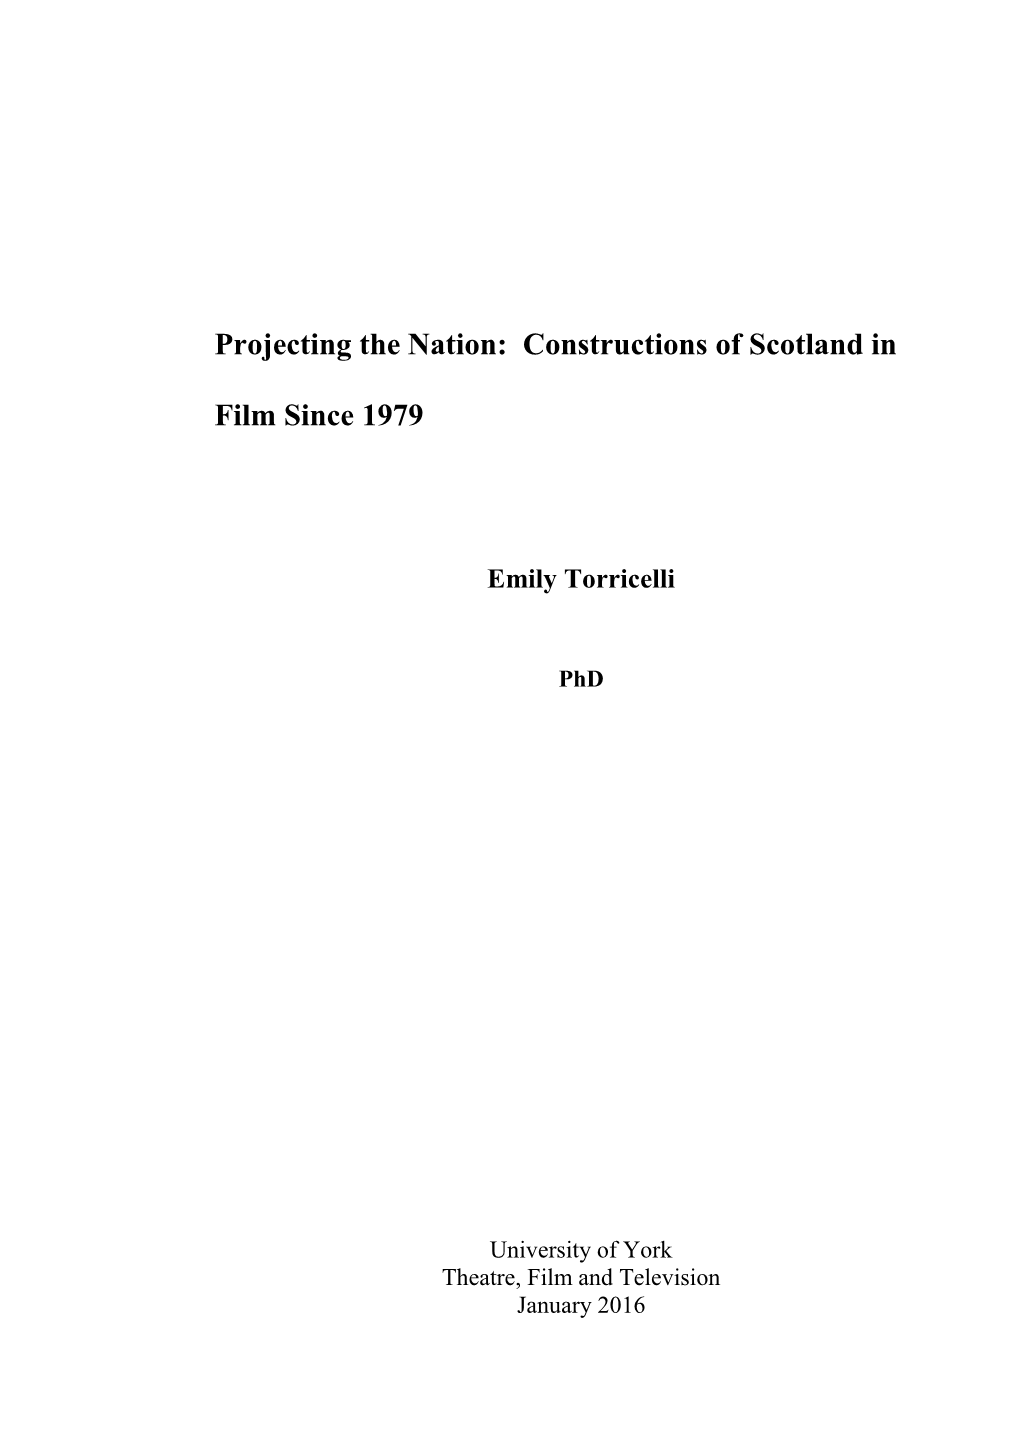 Projecting the Nation: Constructions of Scotland in Film Since 1979